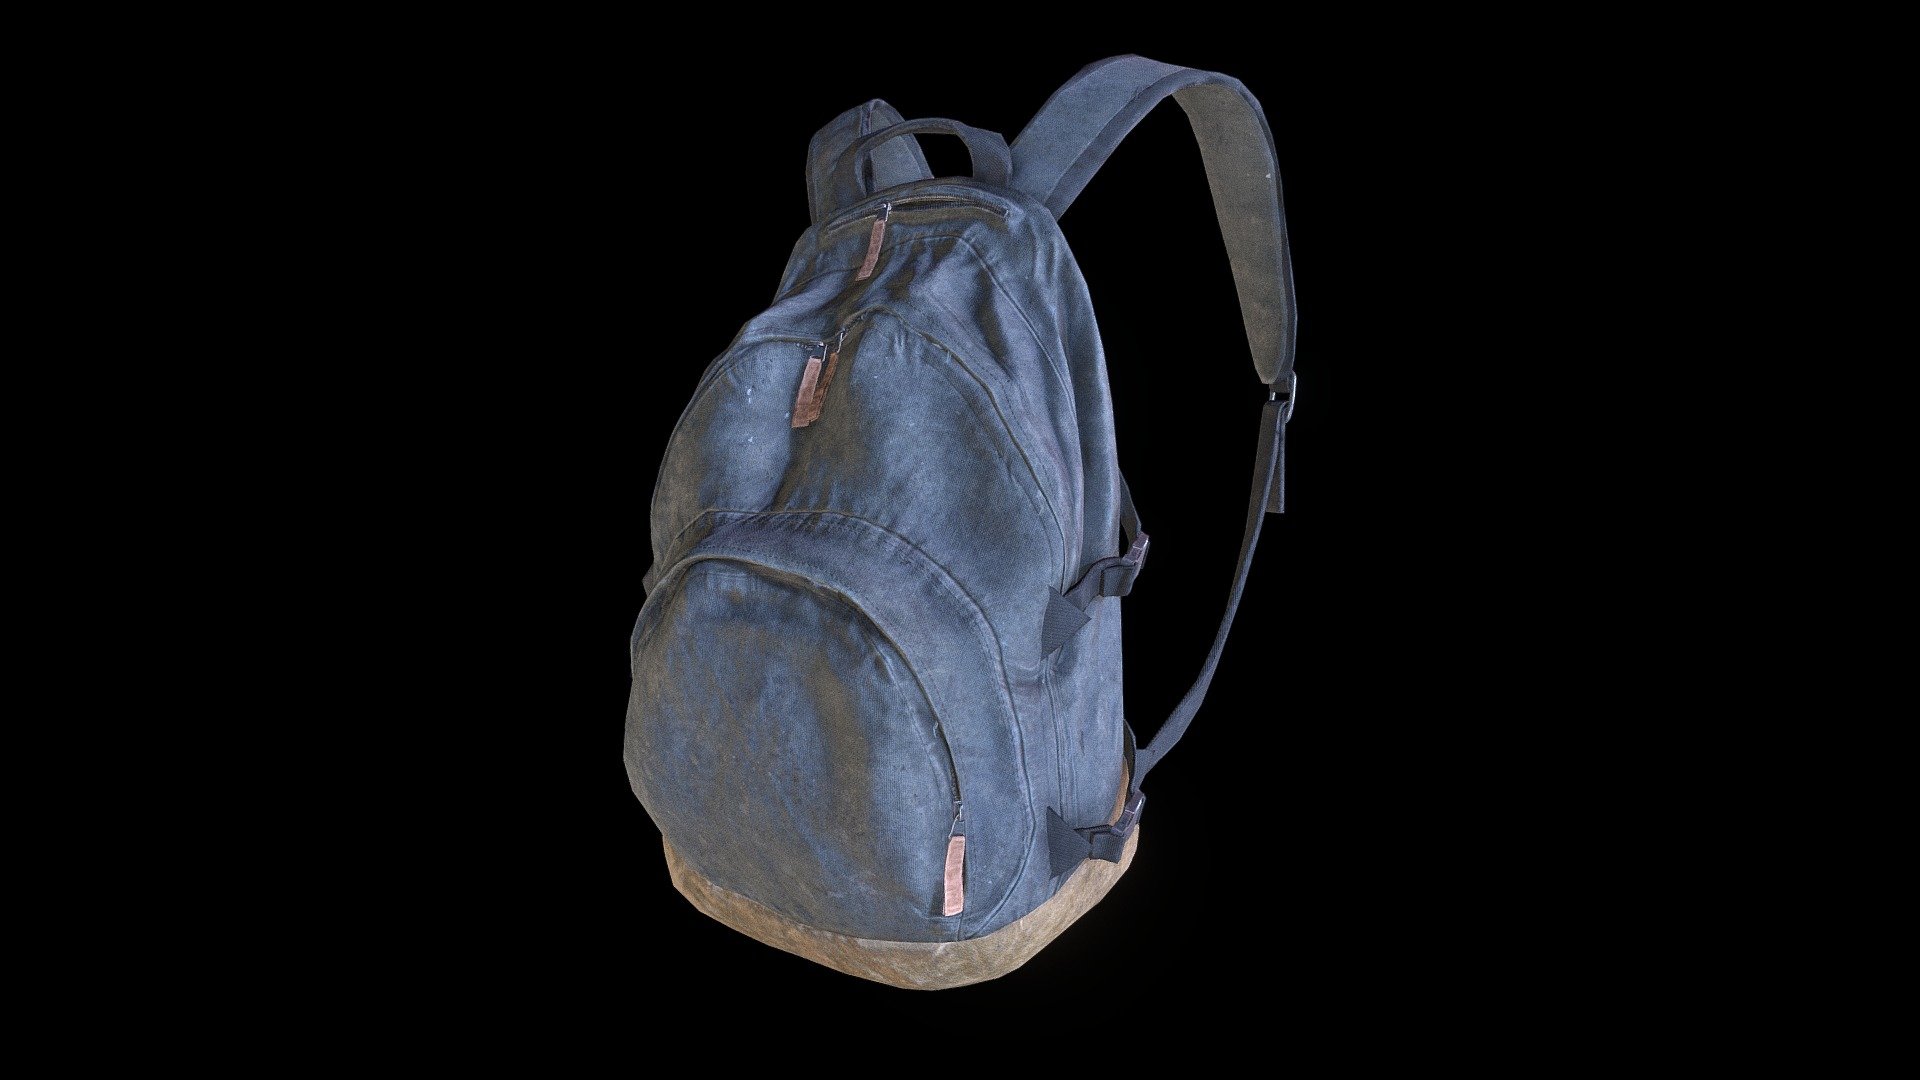 Game Ready, Canvas Backpack model originally made as a mod for DayZ, based on Ellie's on The Last of Us Part II 3d model